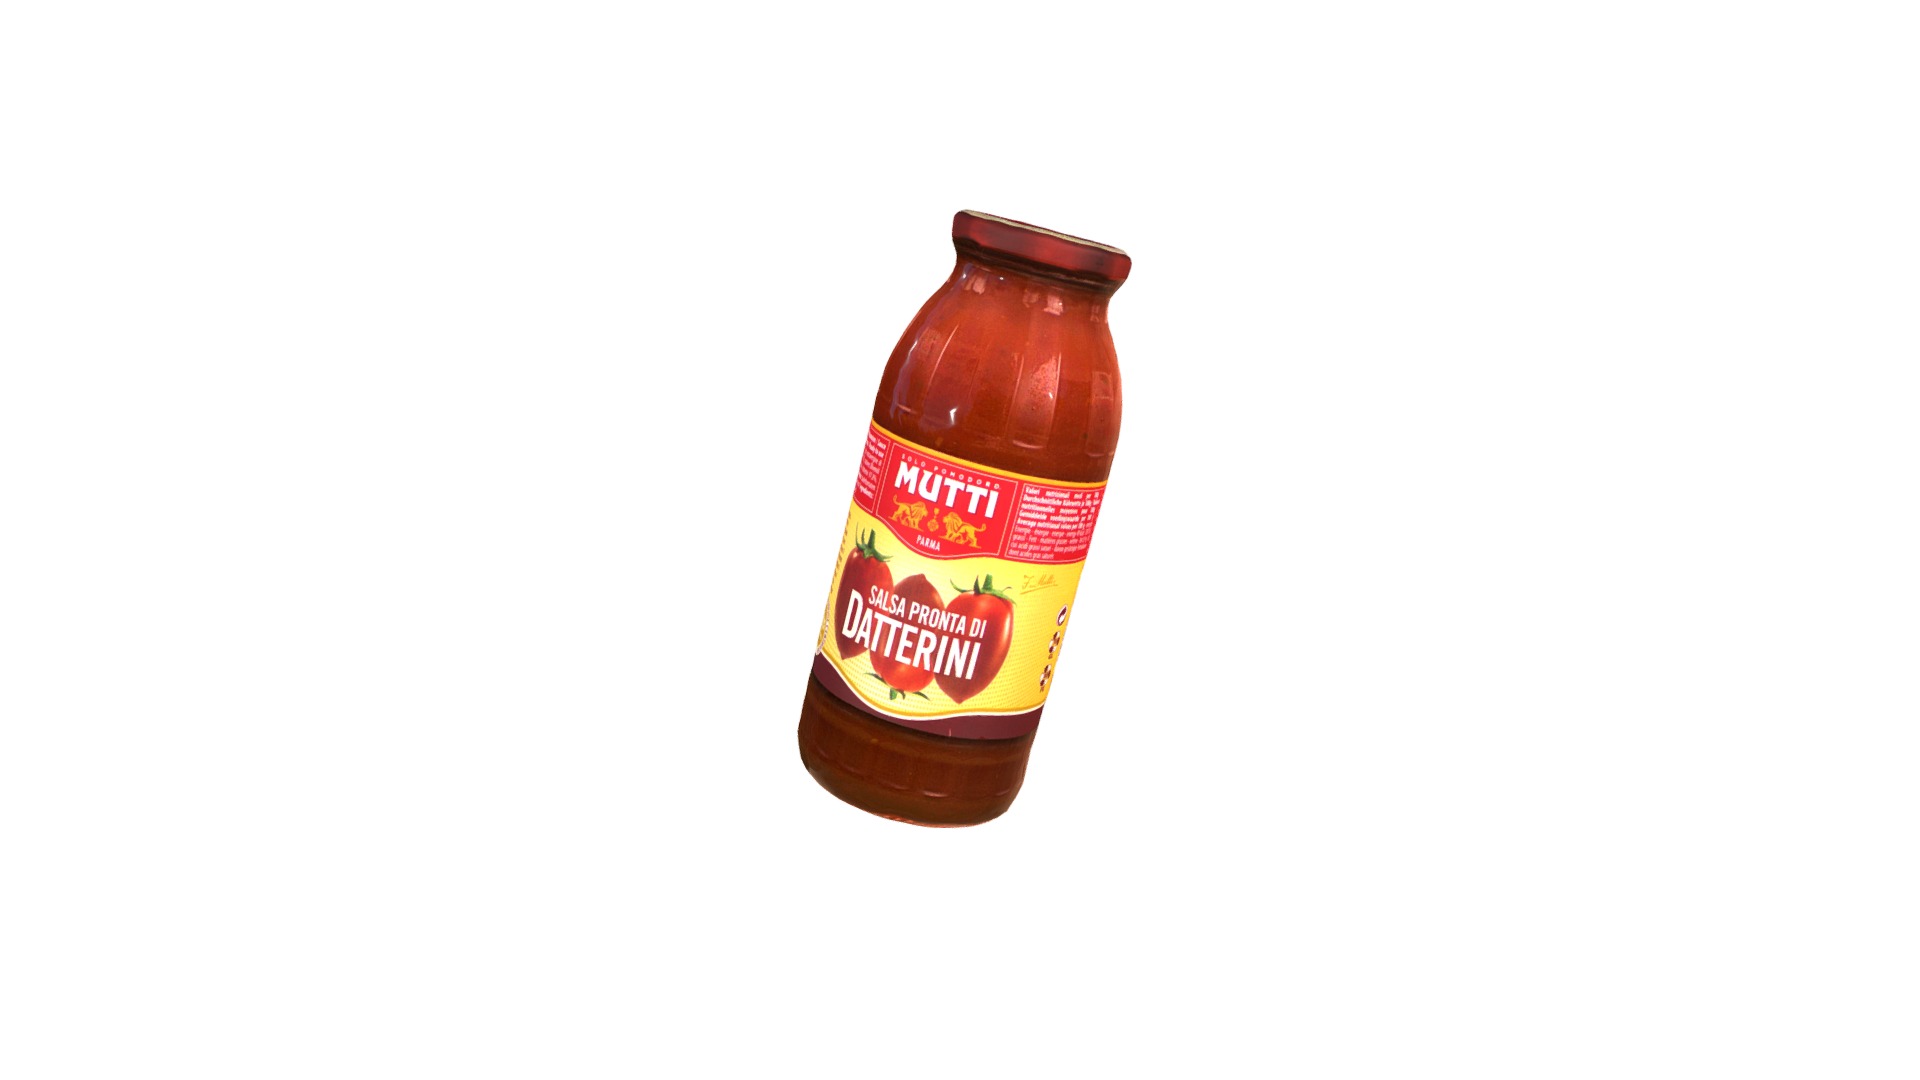 3D model Salsa Pronta Di Datterini - This is a 3D model of the Salsa Pronta Di Datterini. The 3D model is about a bottle of hot sauce.